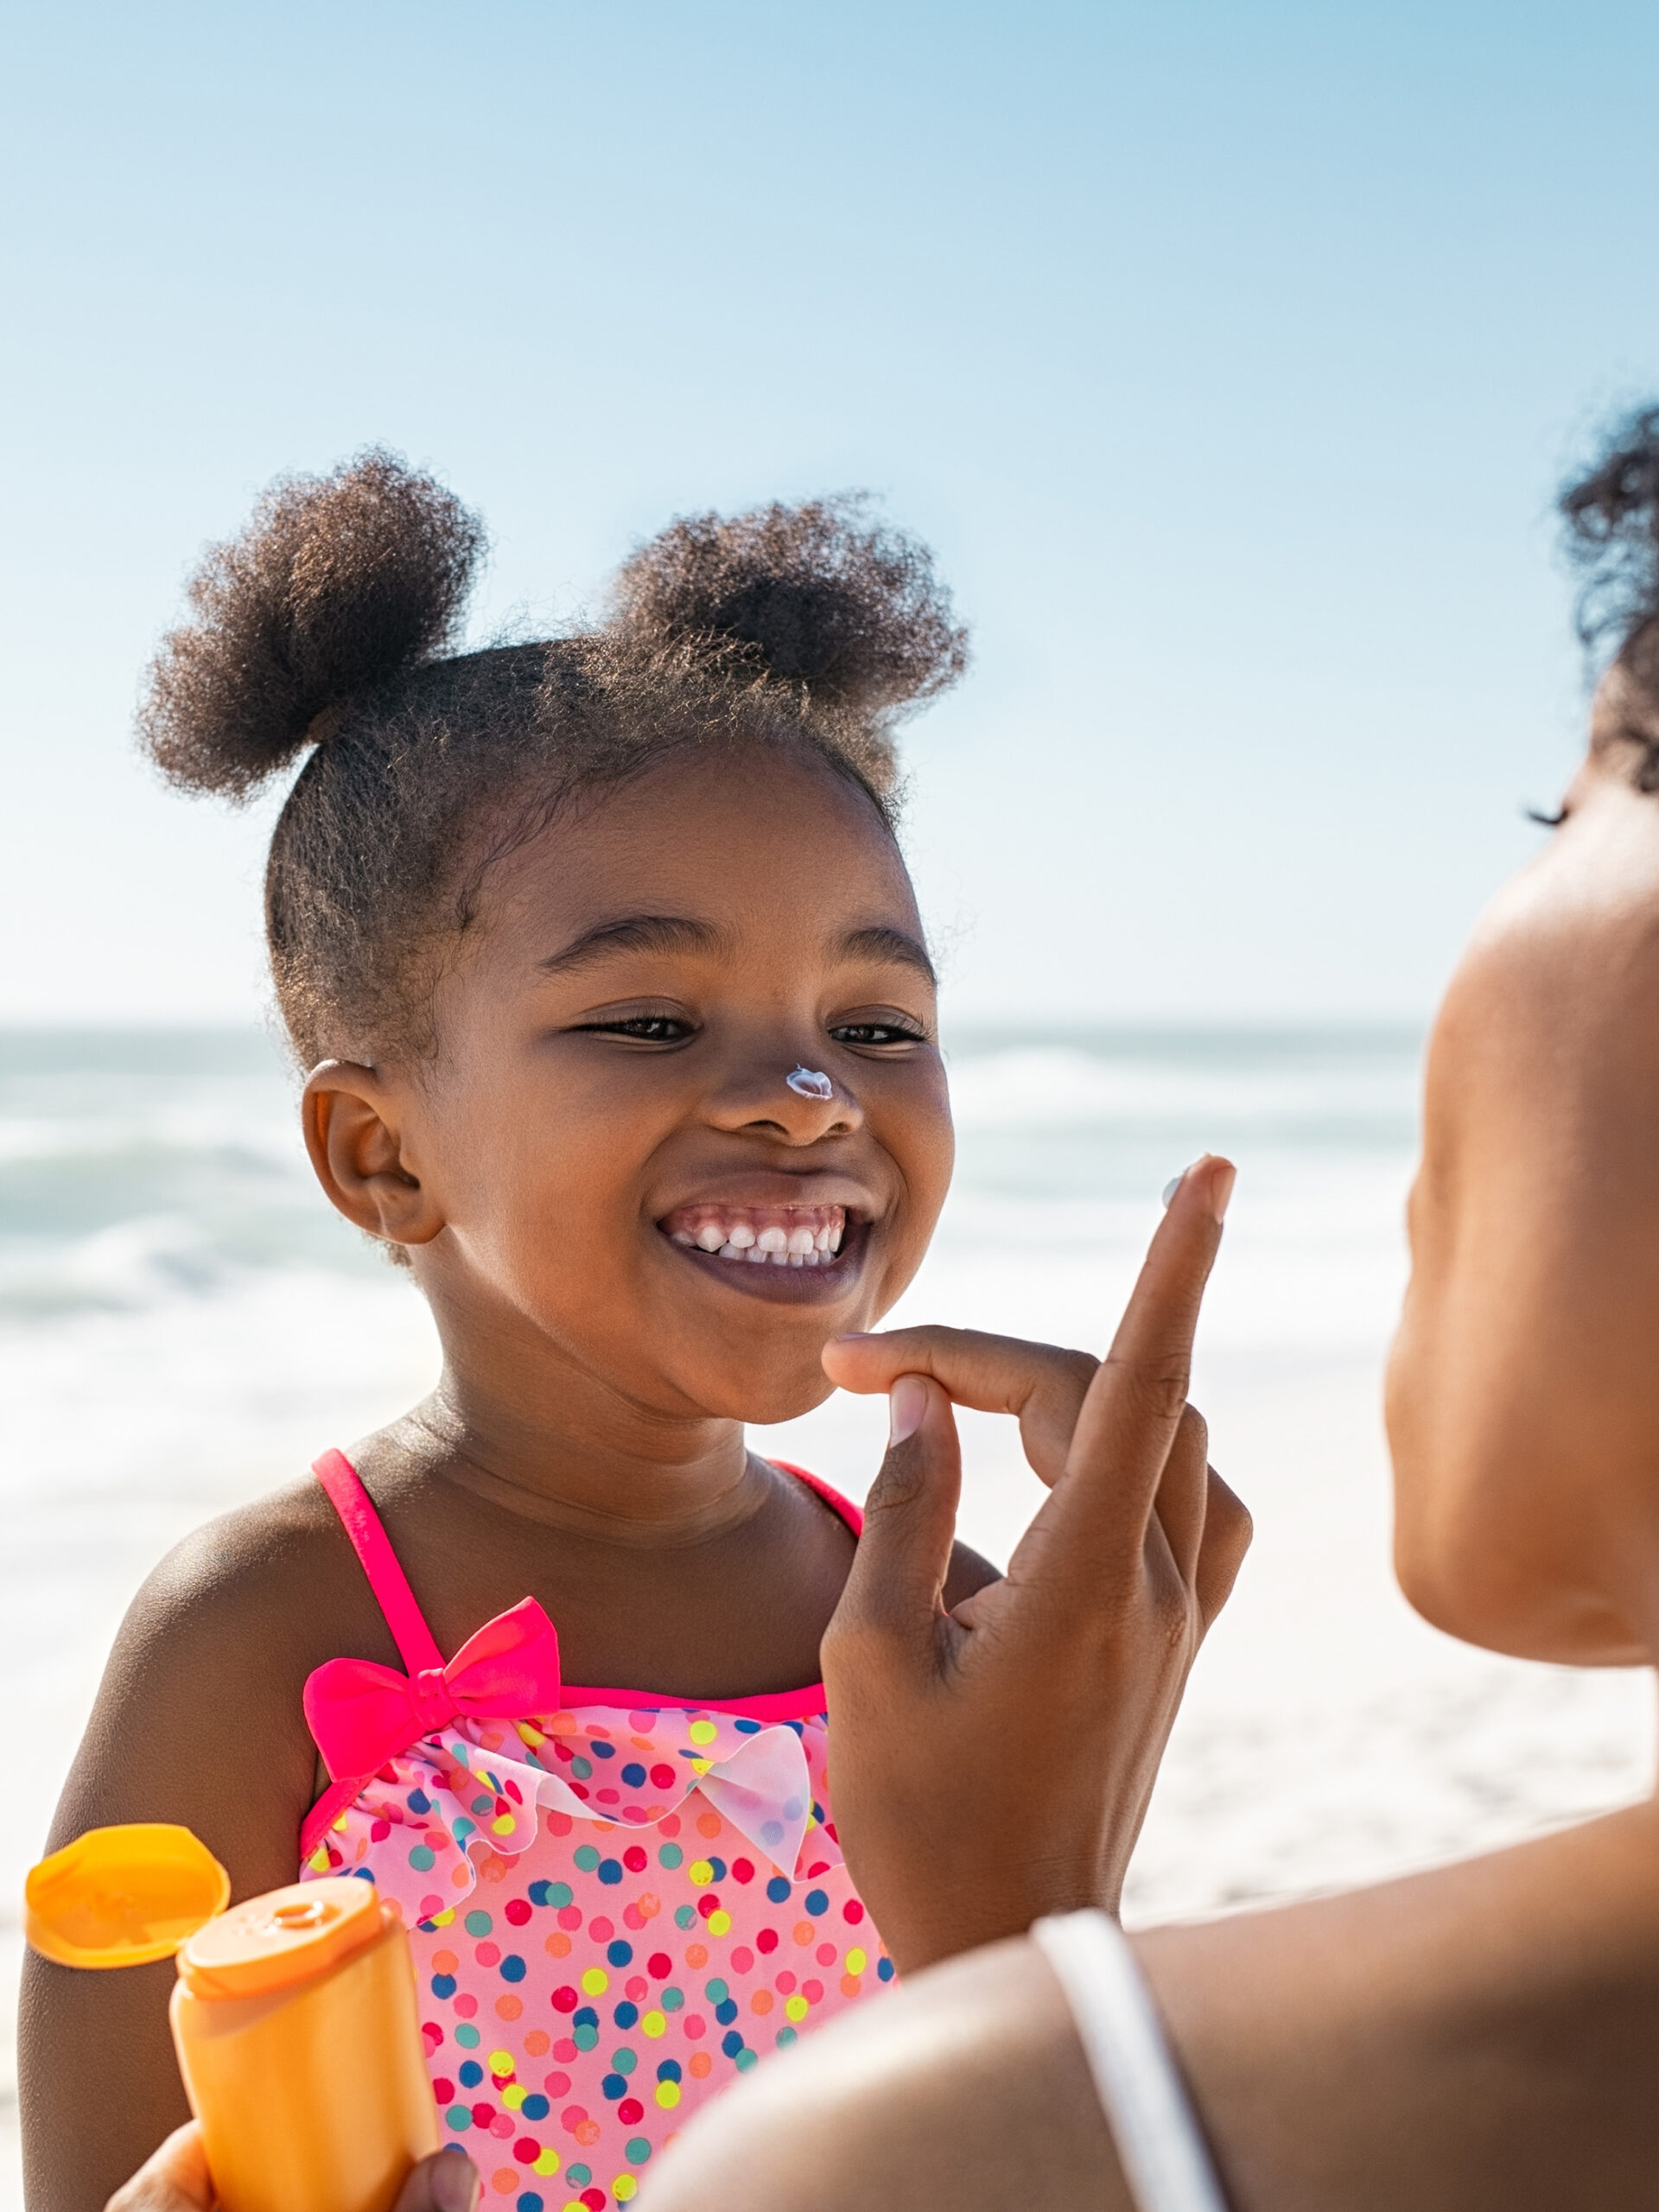 parent puts sunscreen on child at the beach - sun allergies and other skin reactions to the sun in kids. Tips to avoid skin-related reactions to the sun in kids.